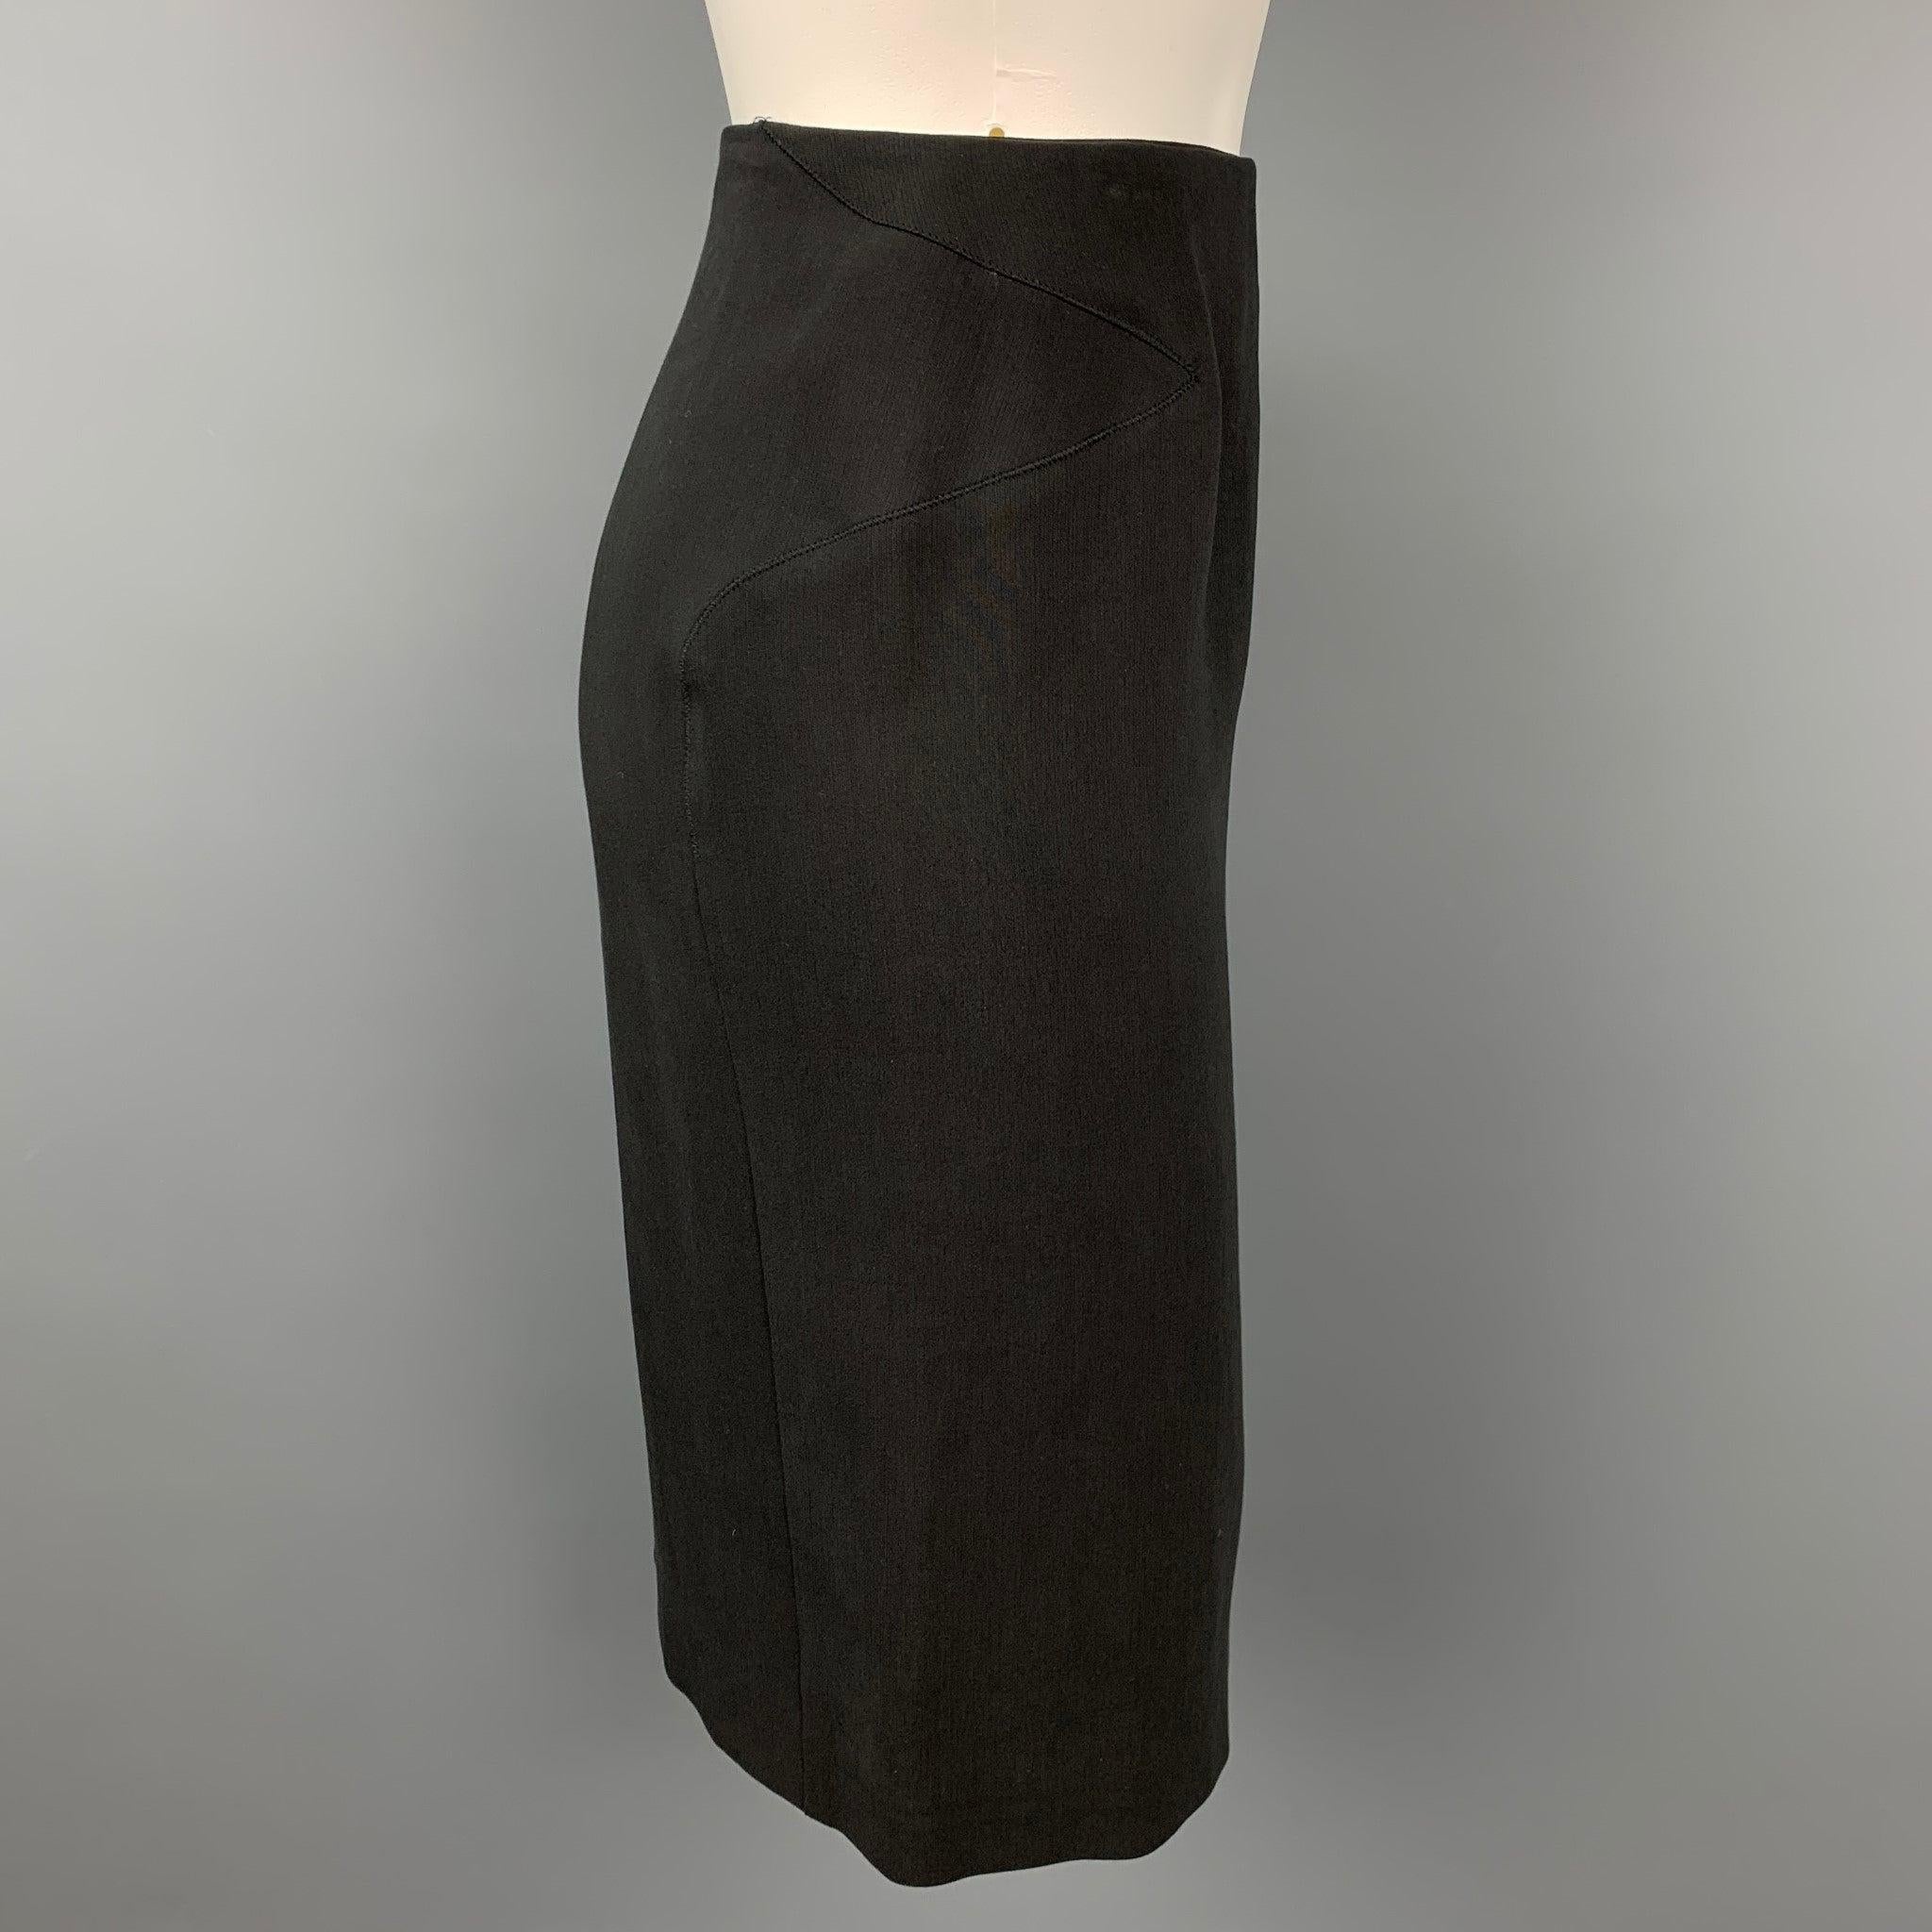 MAISON MARTIN MARGIELA skirt comes in a black cotton / silk featuring a pencil style, top stitching, and a back zipper closure. Made in Italy.New With Tags.
 

Marked:   IT 40 

Measurements: 
  Waist:
28 inches  Hip:
36 inches  Length: 23.5 inches